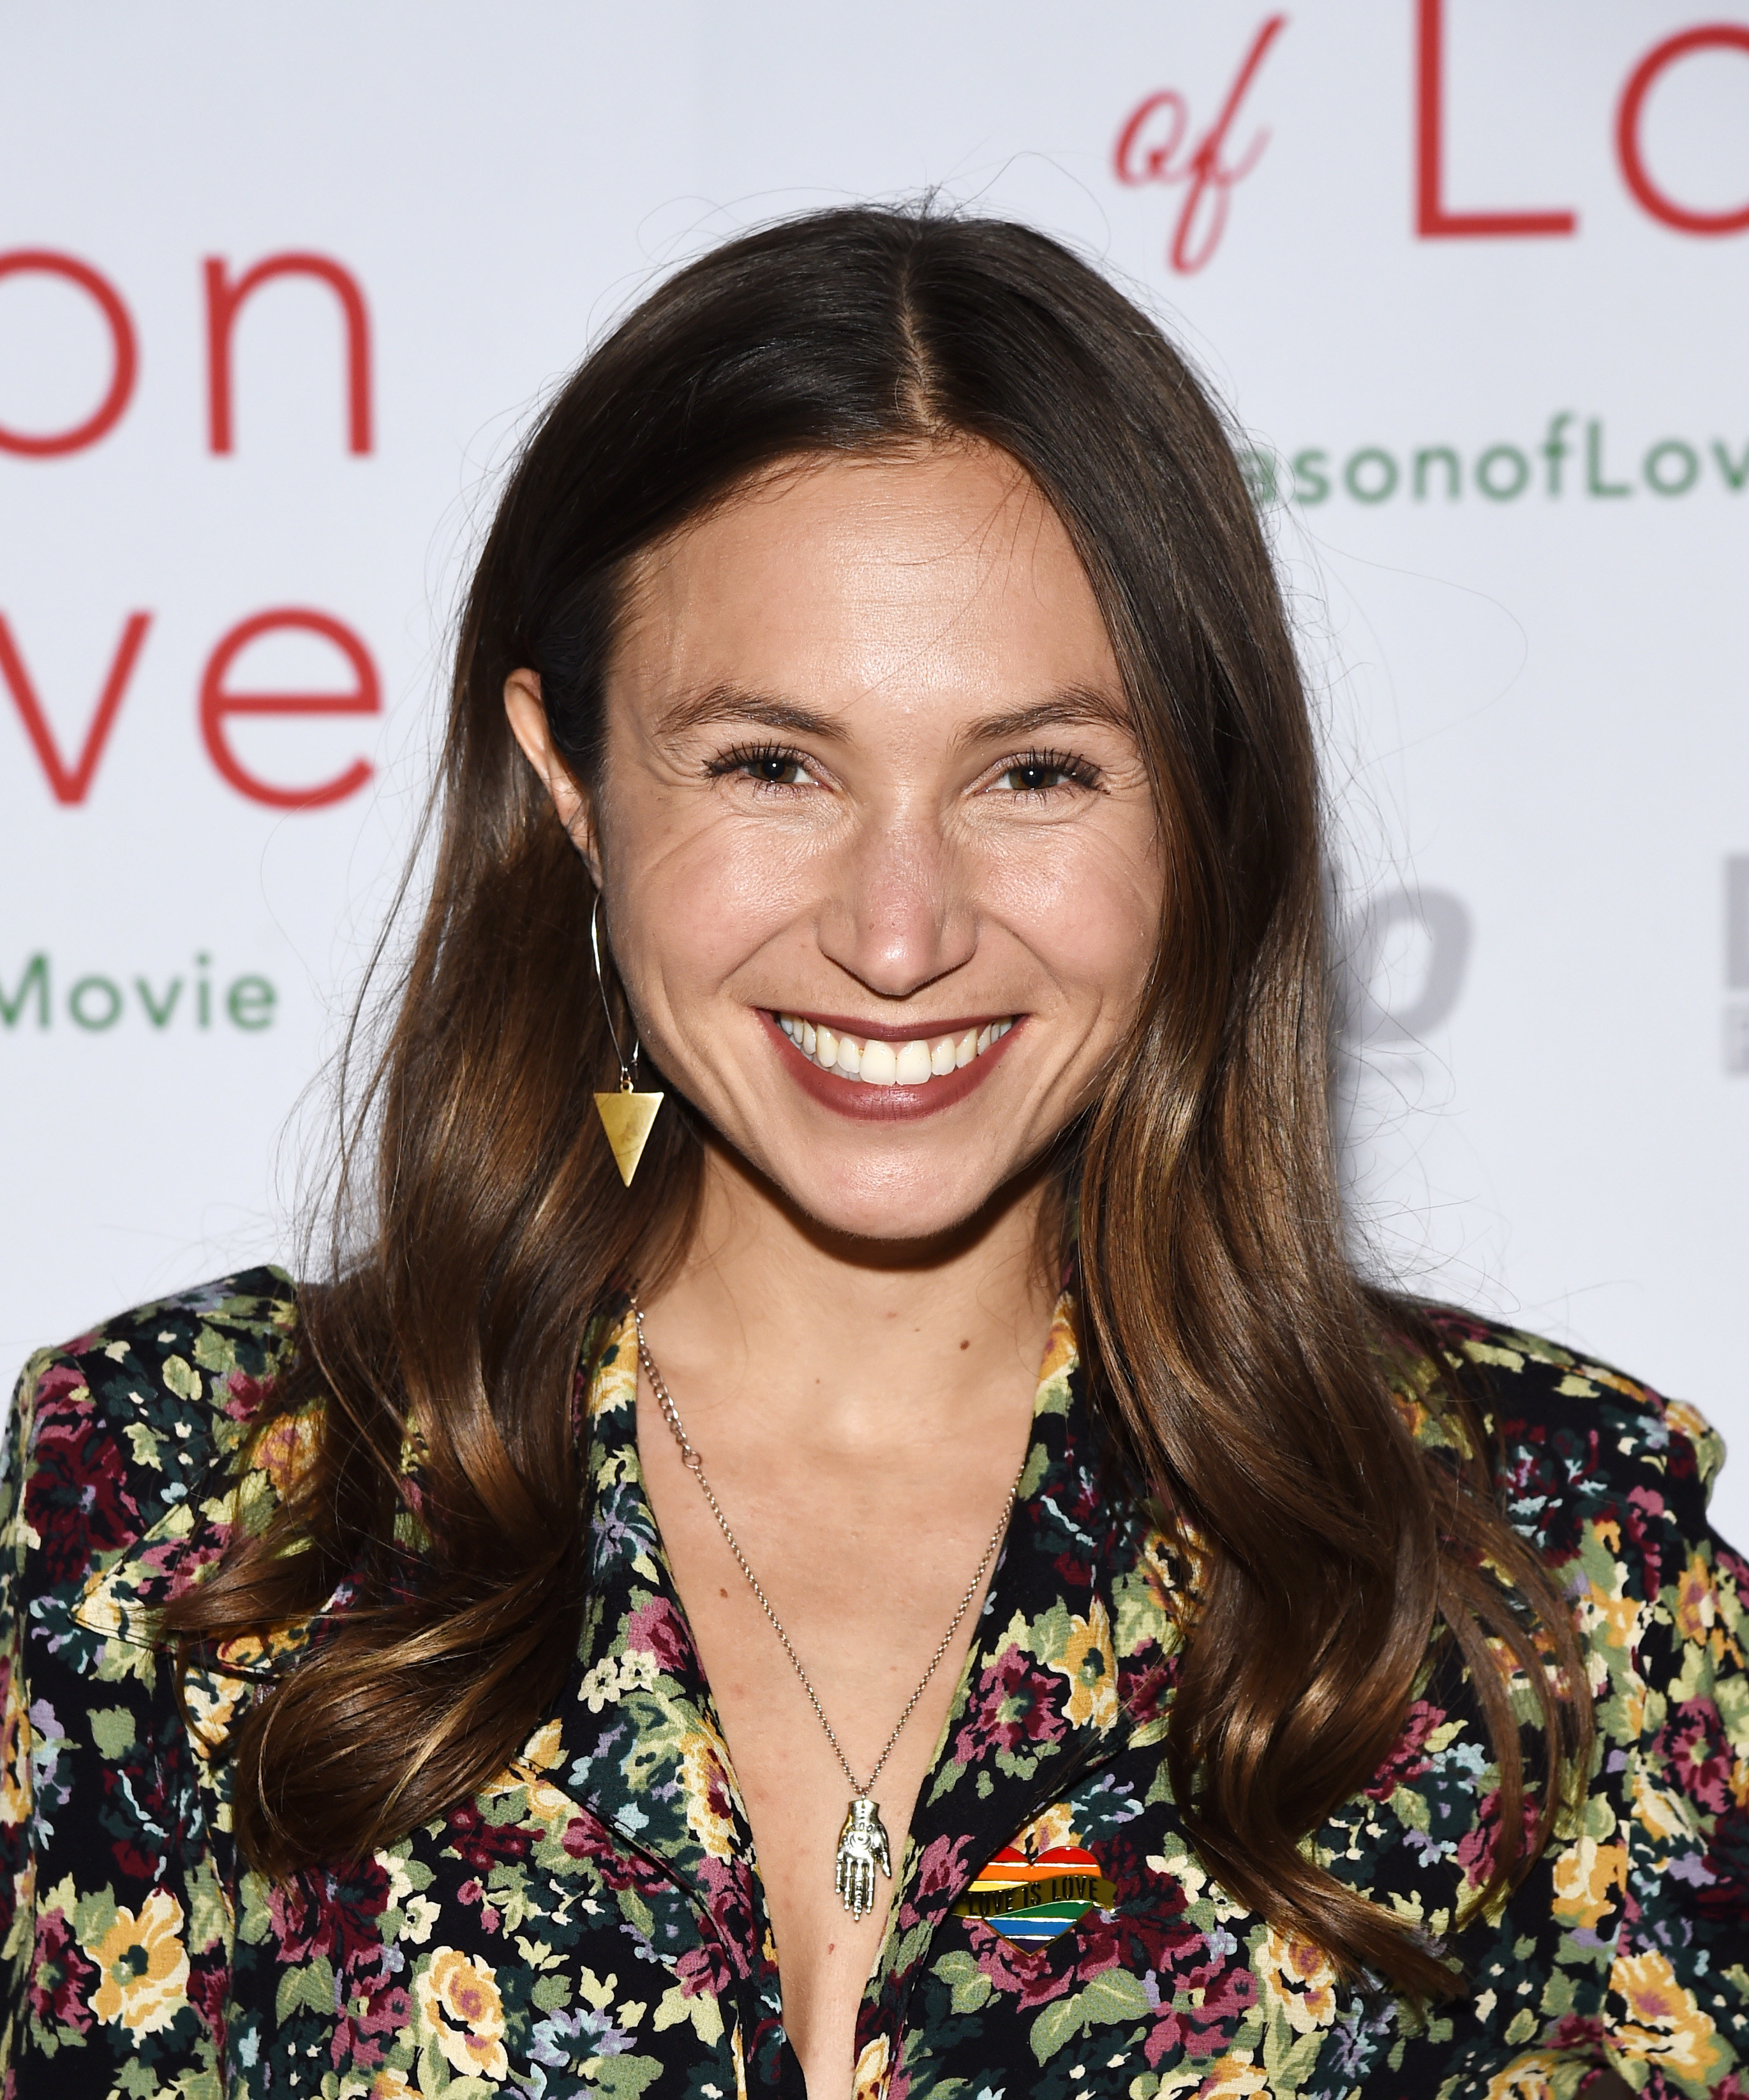 Dominique Provost-Chalkley posing at an event wearing a flowery top that has a rainbow heart pin on it